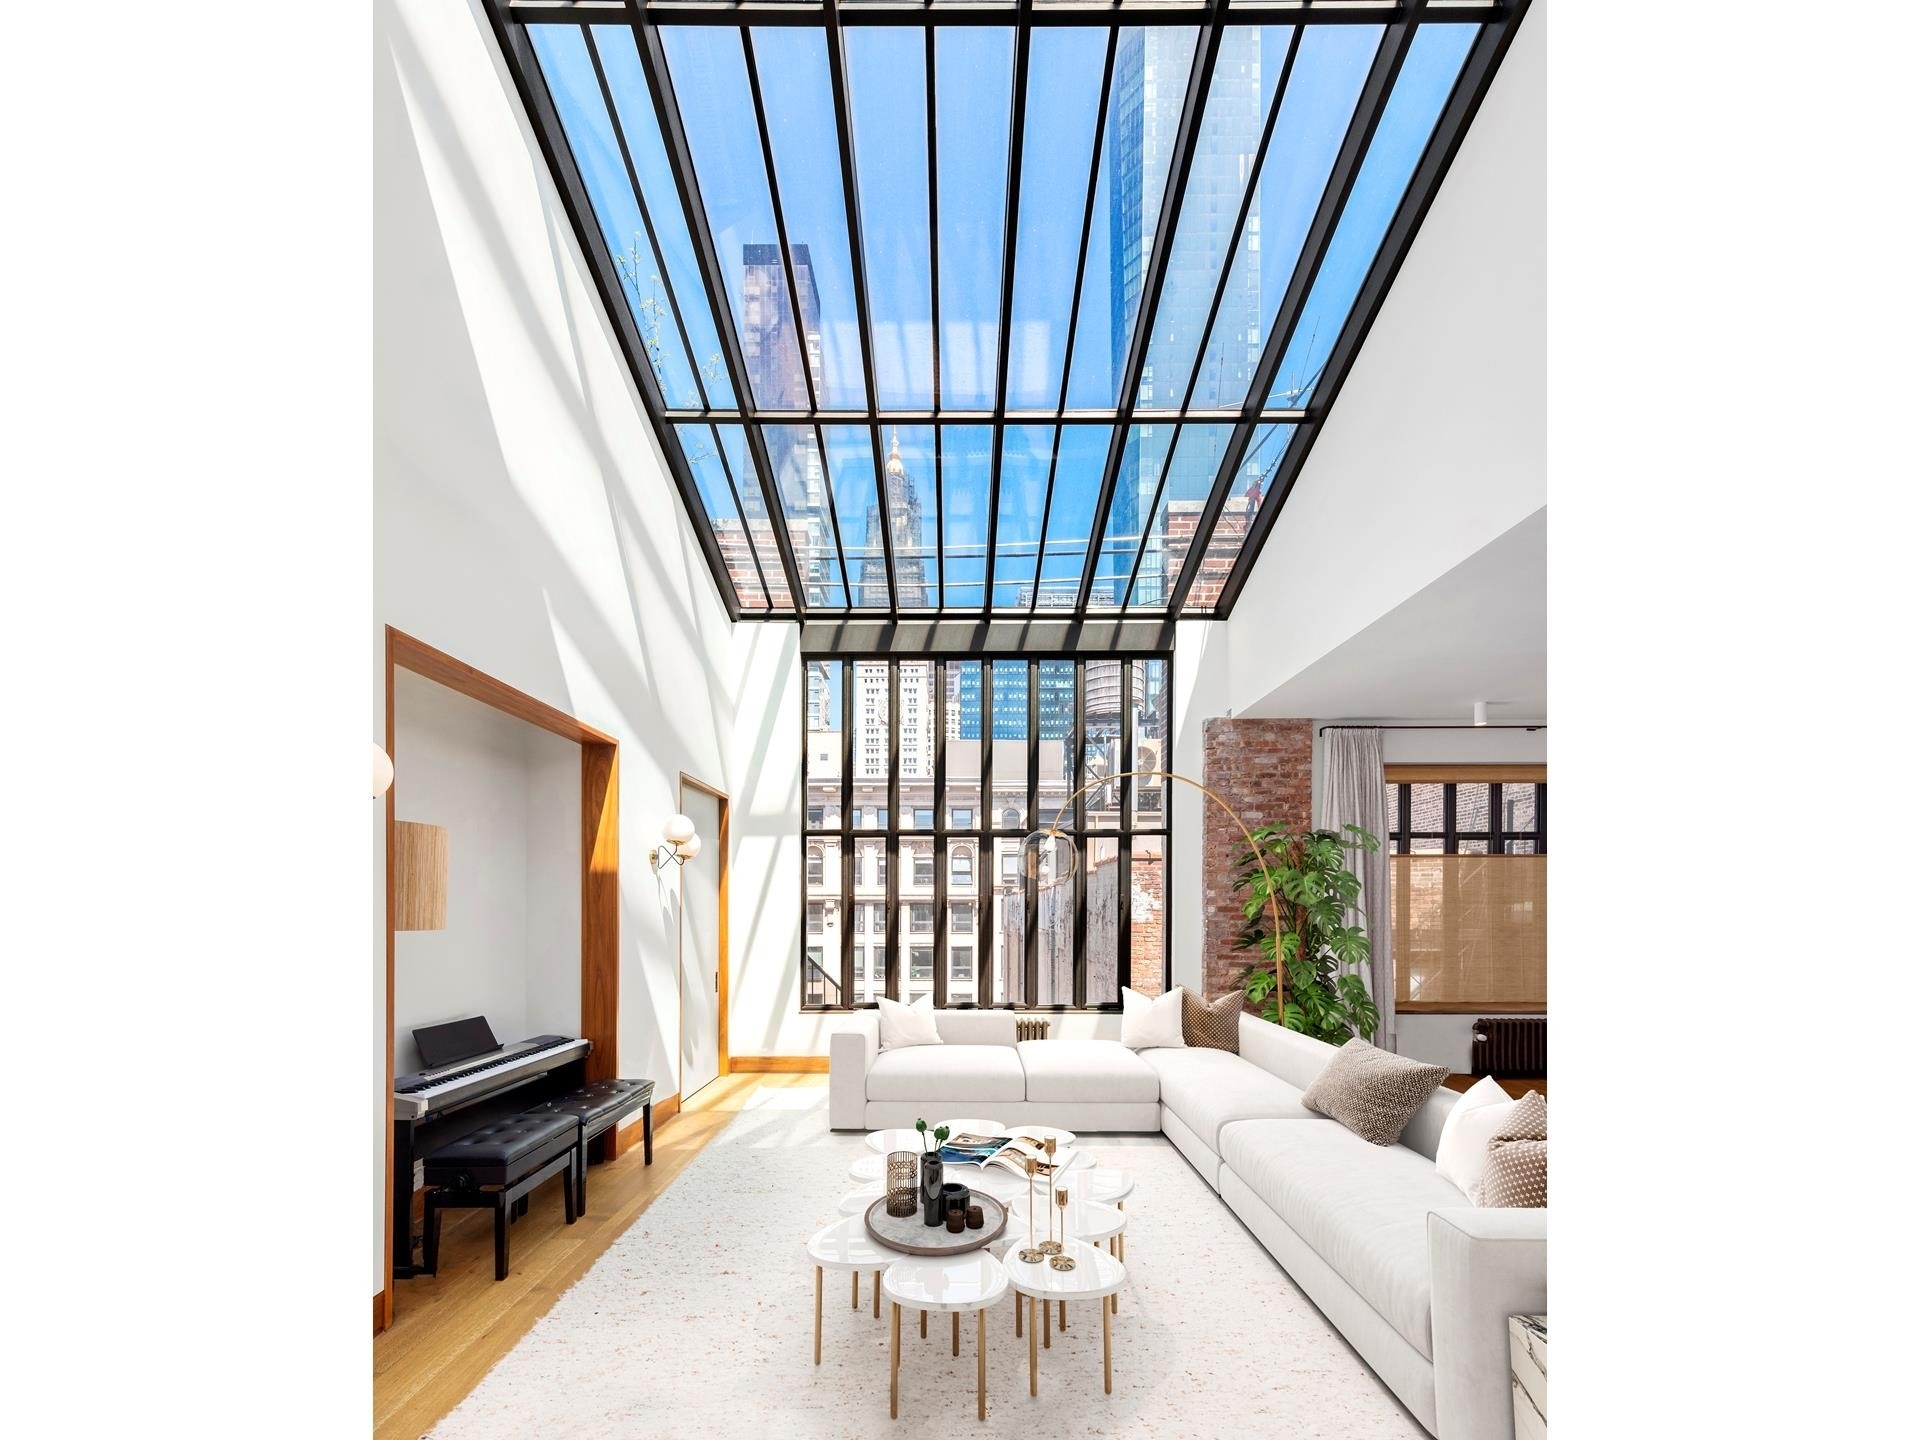 Co-op Properties for Sale at 35 E 20TH ST, PH8 Flatiron District, New York, New York 10003